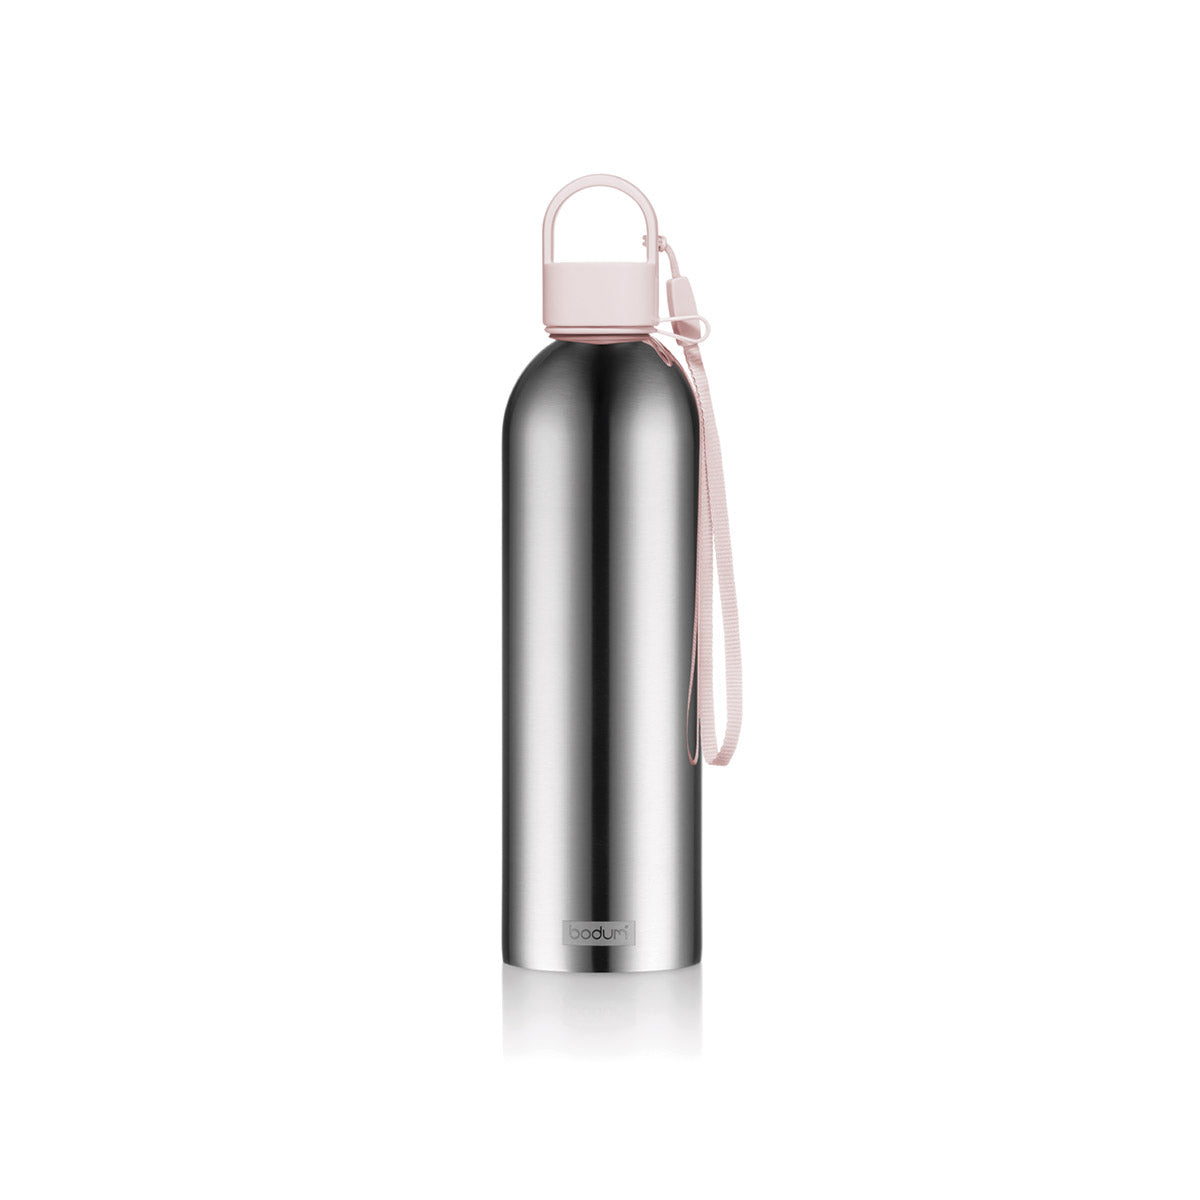 NEW Bodum Melior Stainless Steel Water Bottle 0.5L - Strawberry Pink